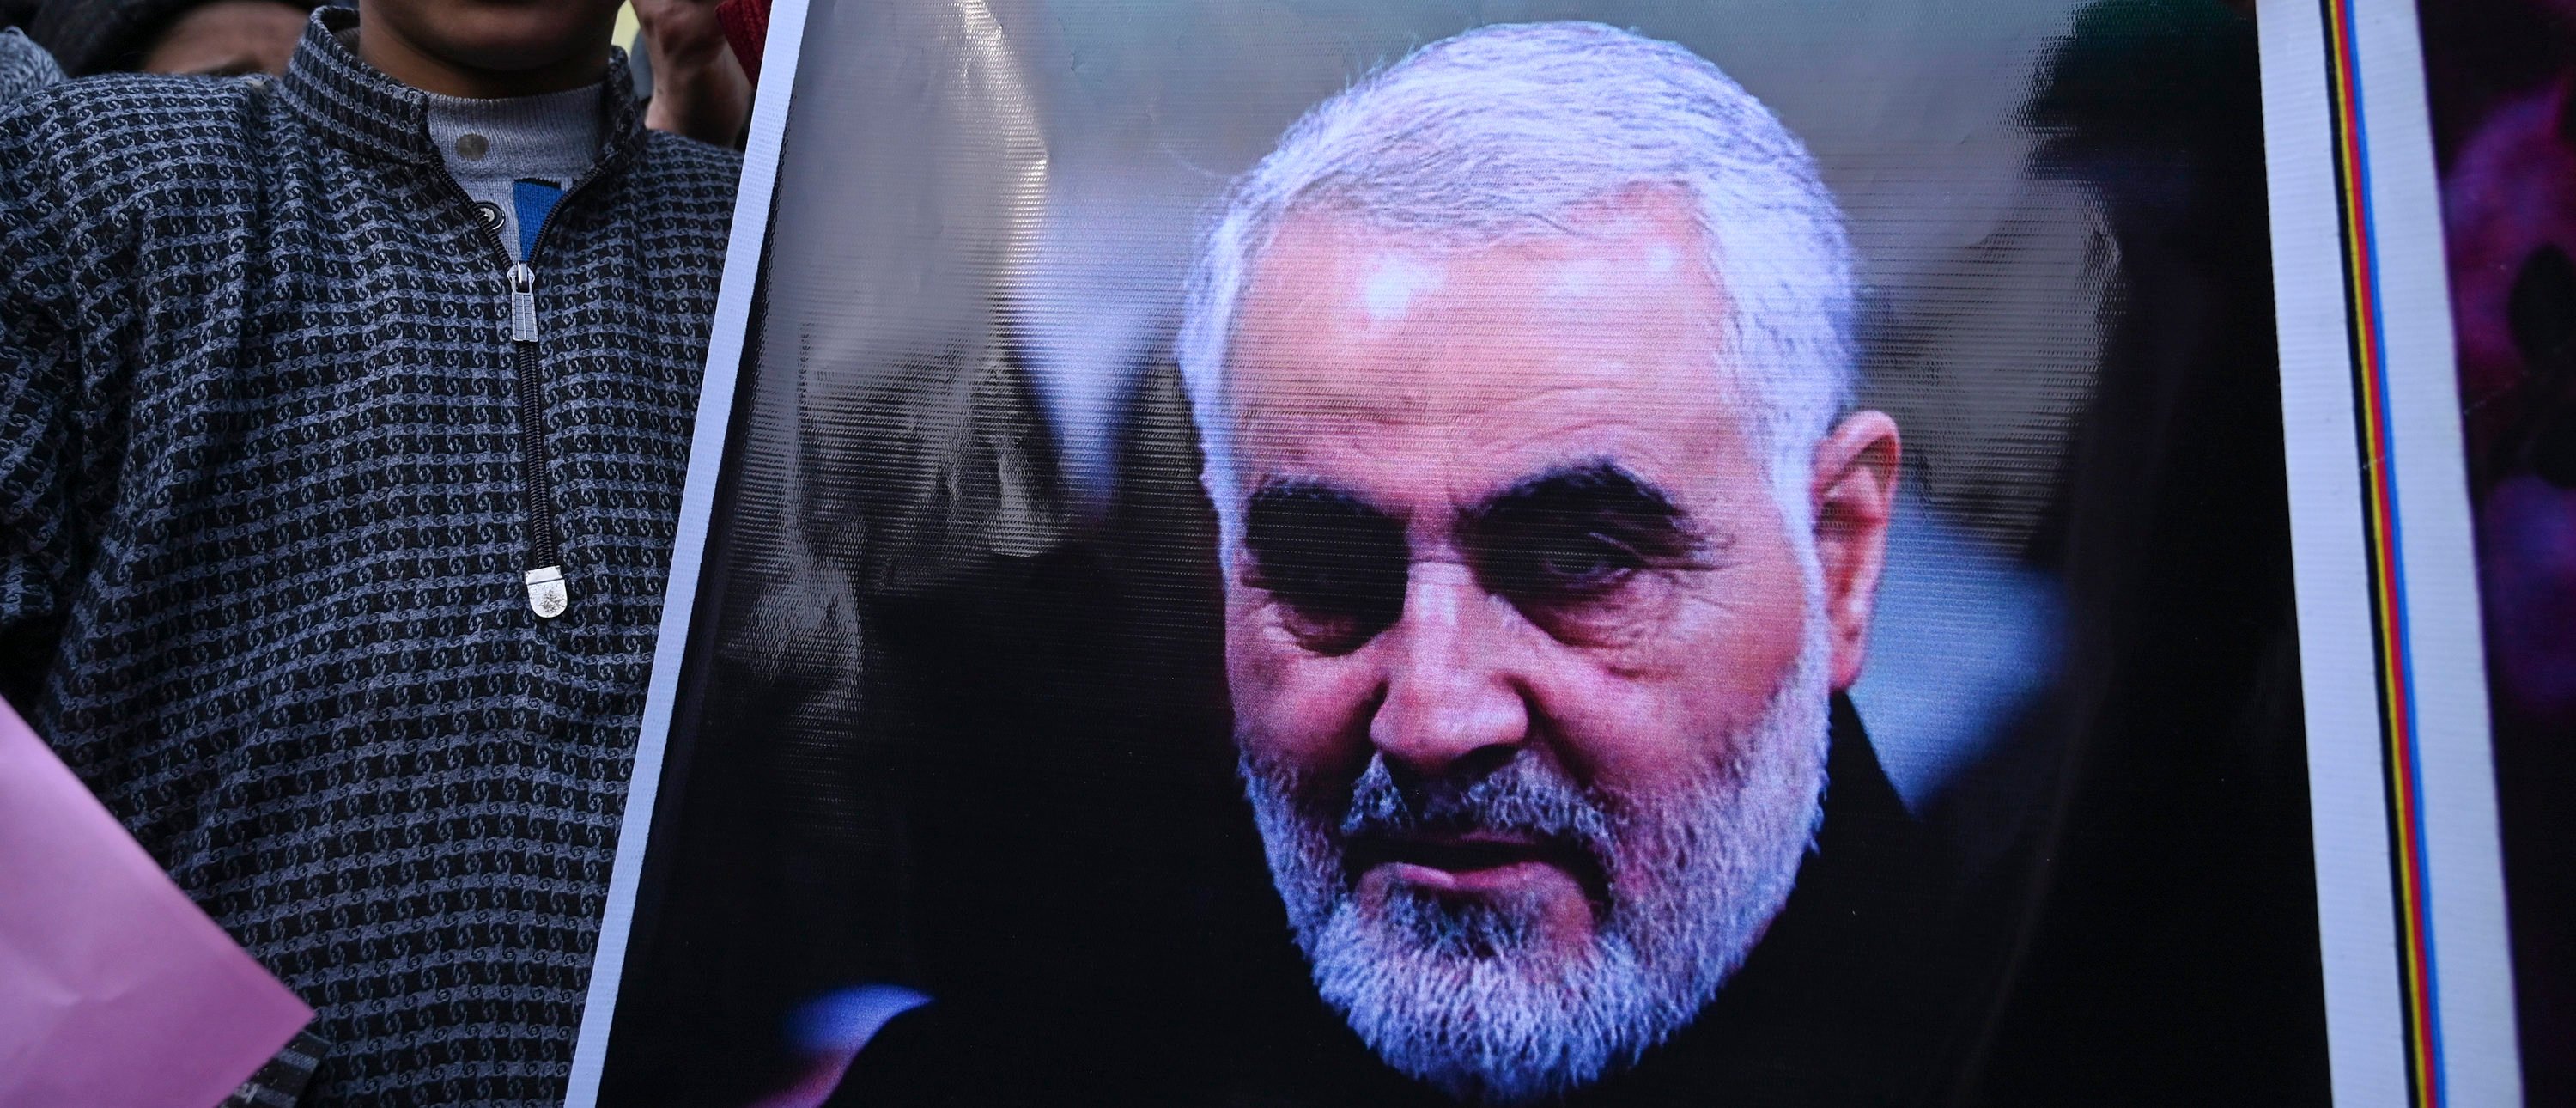 A protester holds a poster with the image of top Iranian commander Qasem Soleimani, who was killed in a US airstrike in Iraq, in the Kashmiri town of Magam on January 3, 2020. - Hundreds of people in Indian Kashmir staged "anti-American" demonstrations in the troubled territory on January 3 within hours of US forces killing a top Iranian commander. (Photo by TAUSEEF MUSTAFA/AFP via Getty Images)